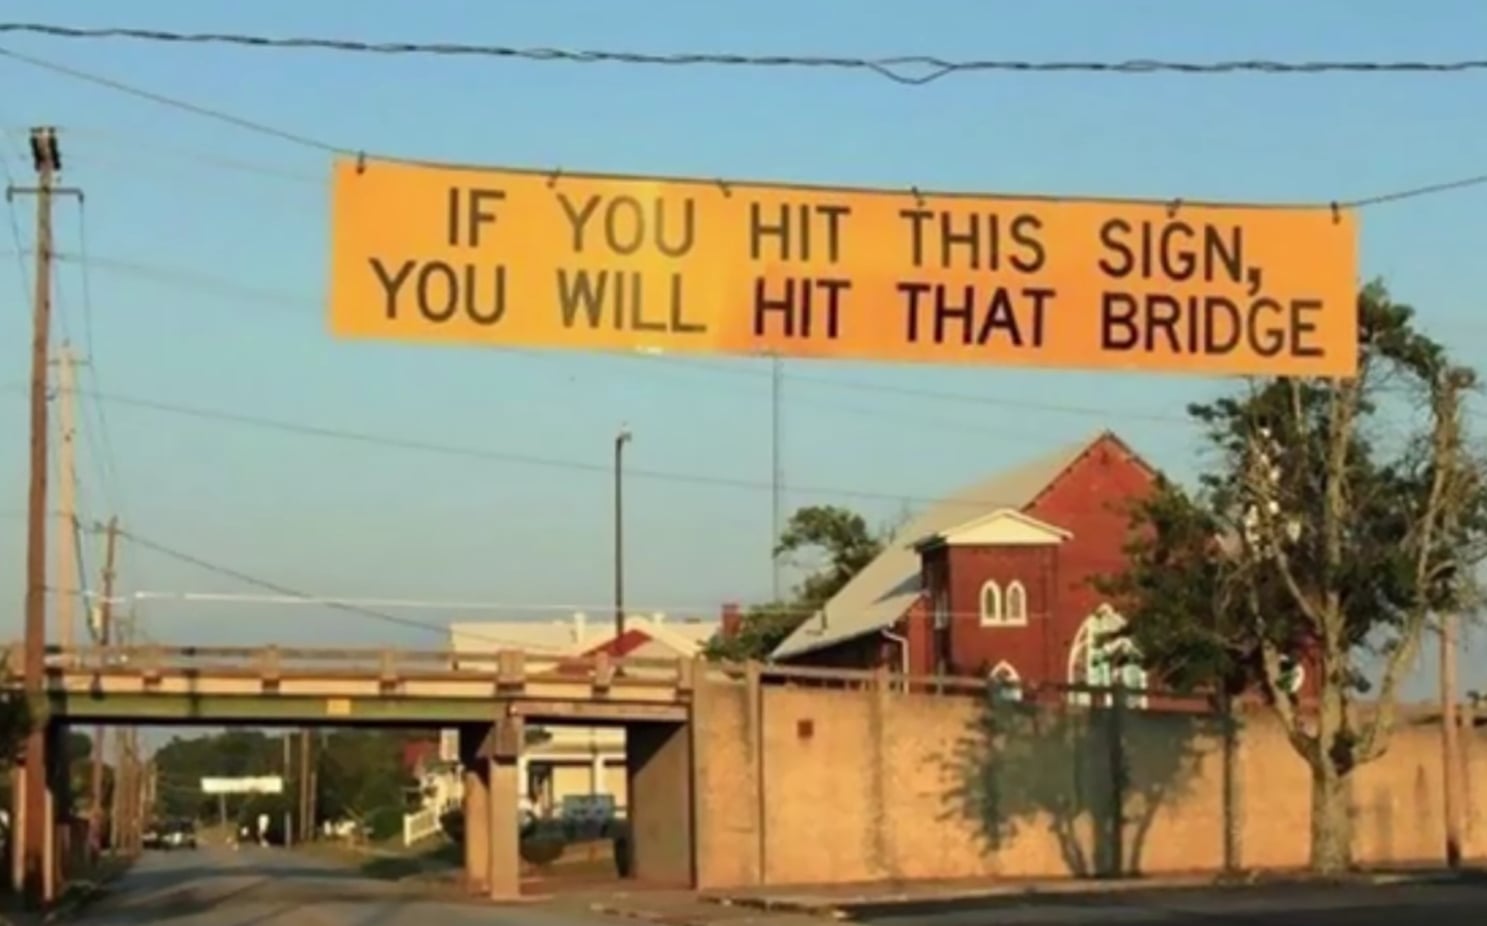 A sign in front of a bridge in Griffin, Georgia, USA that reads “If you hit this sign, you will hit that bridge.”.